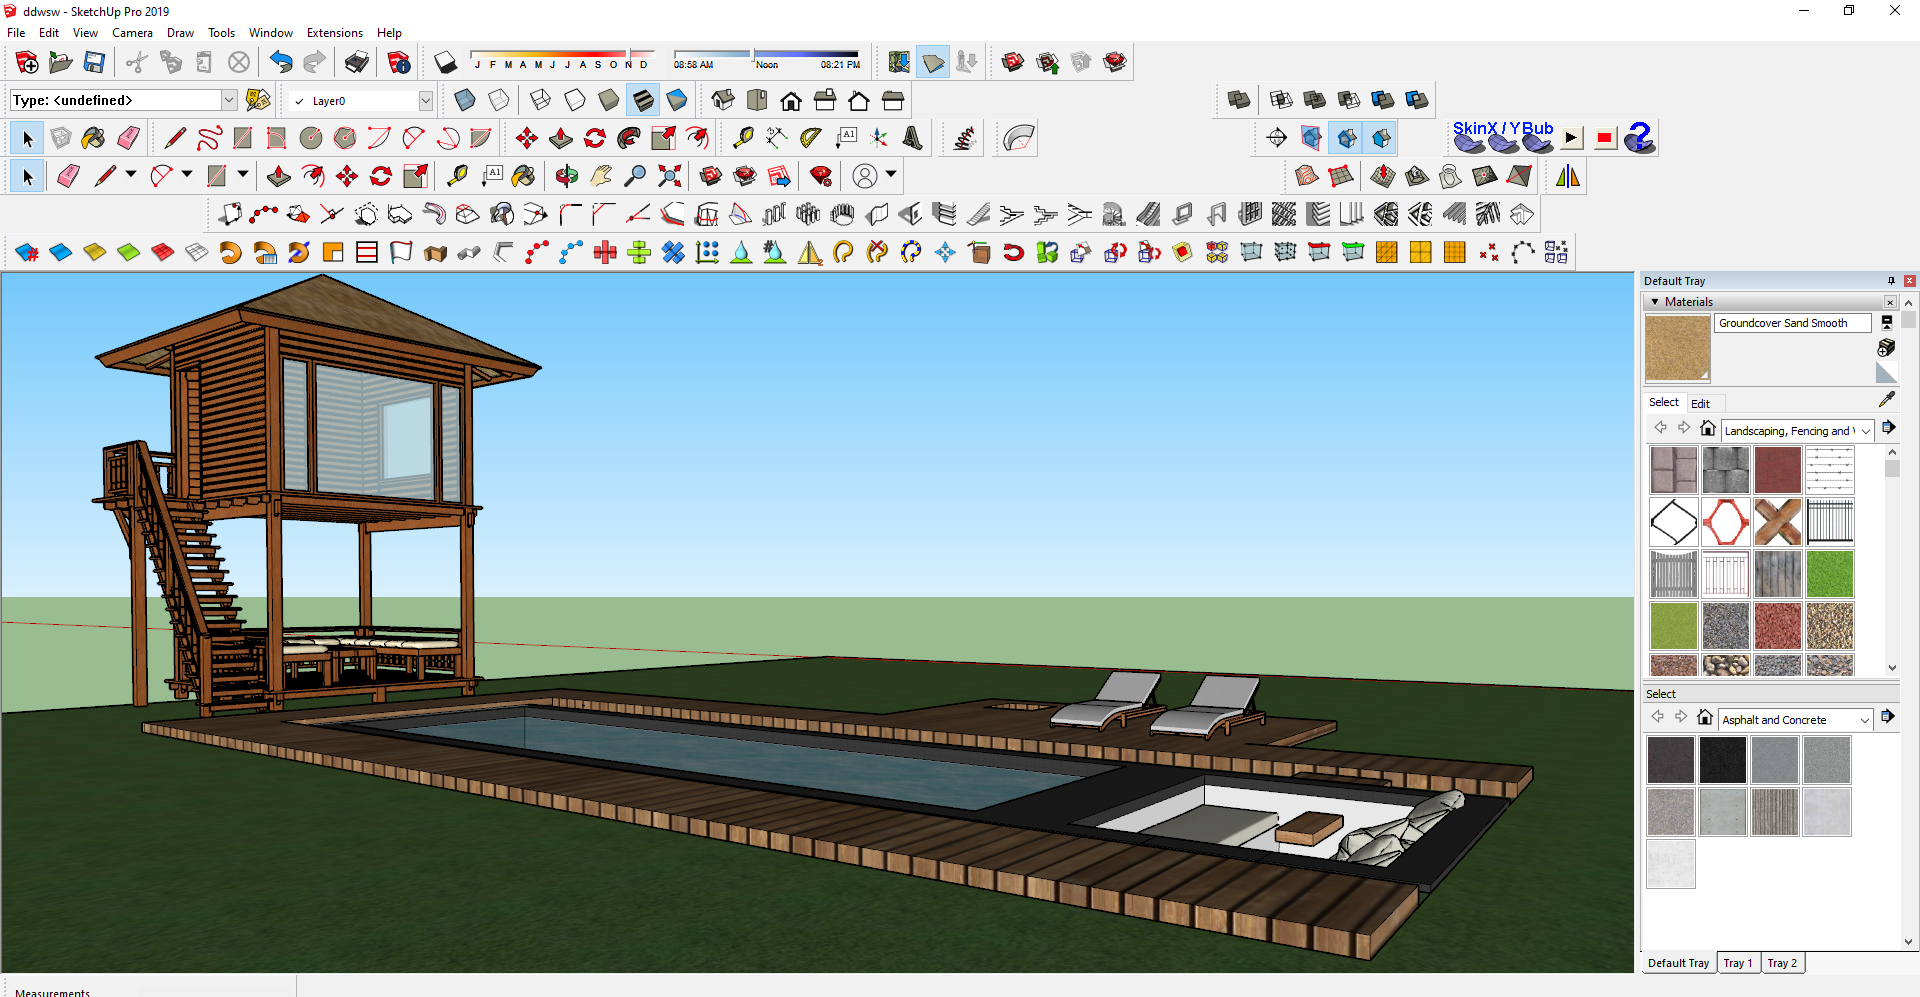 ddwsw - SketchUp Pro 2019 9_14_2021 1_16_14 AM.png